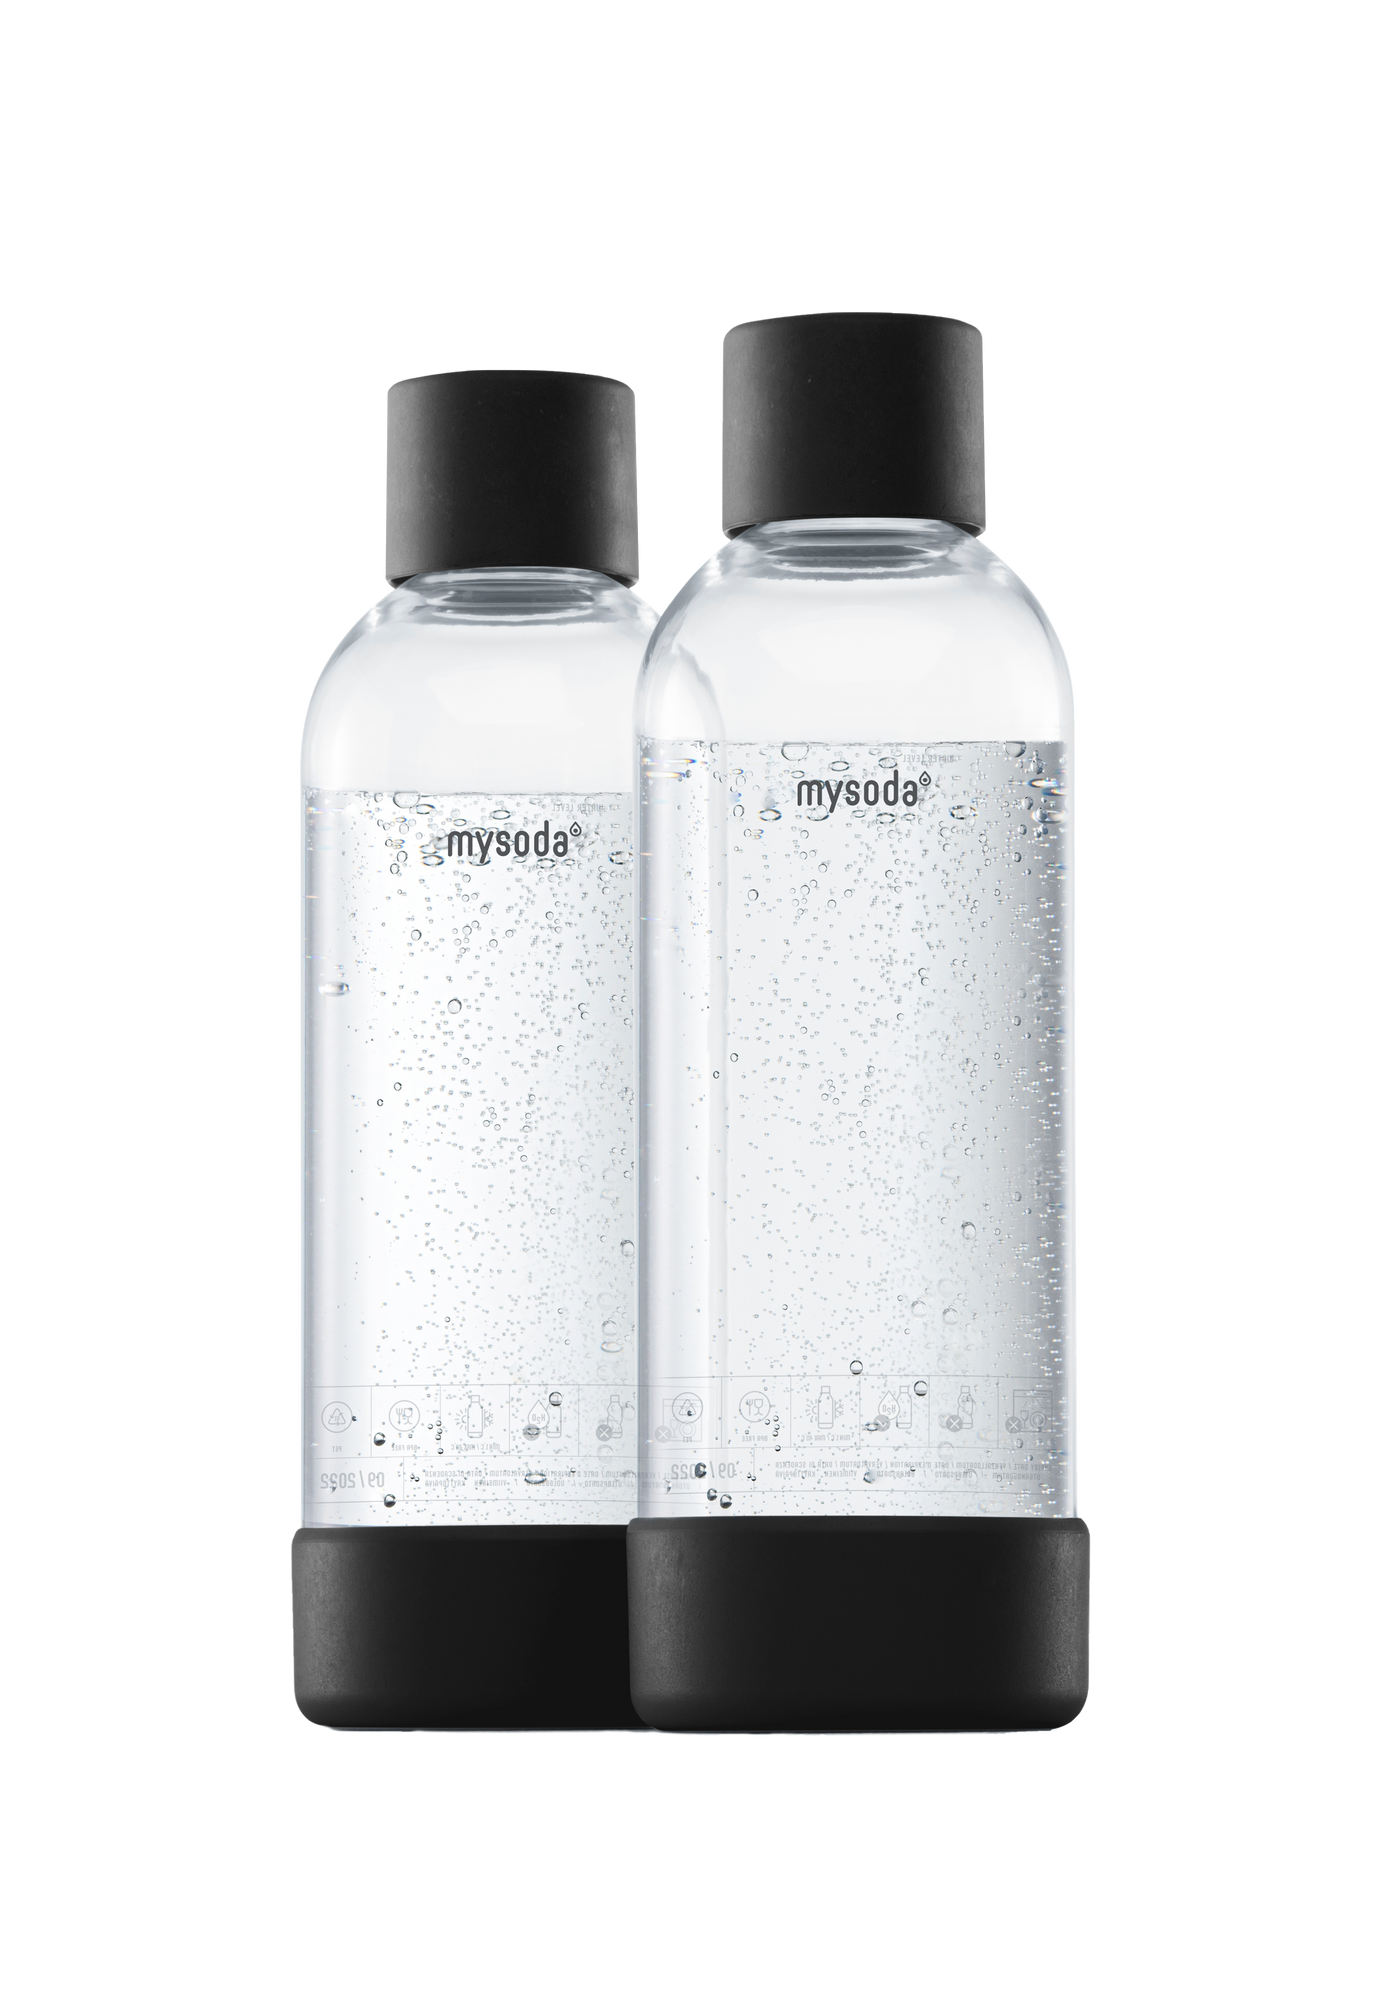 Two 1 liter Mysoda water bottles with black bottom and cap